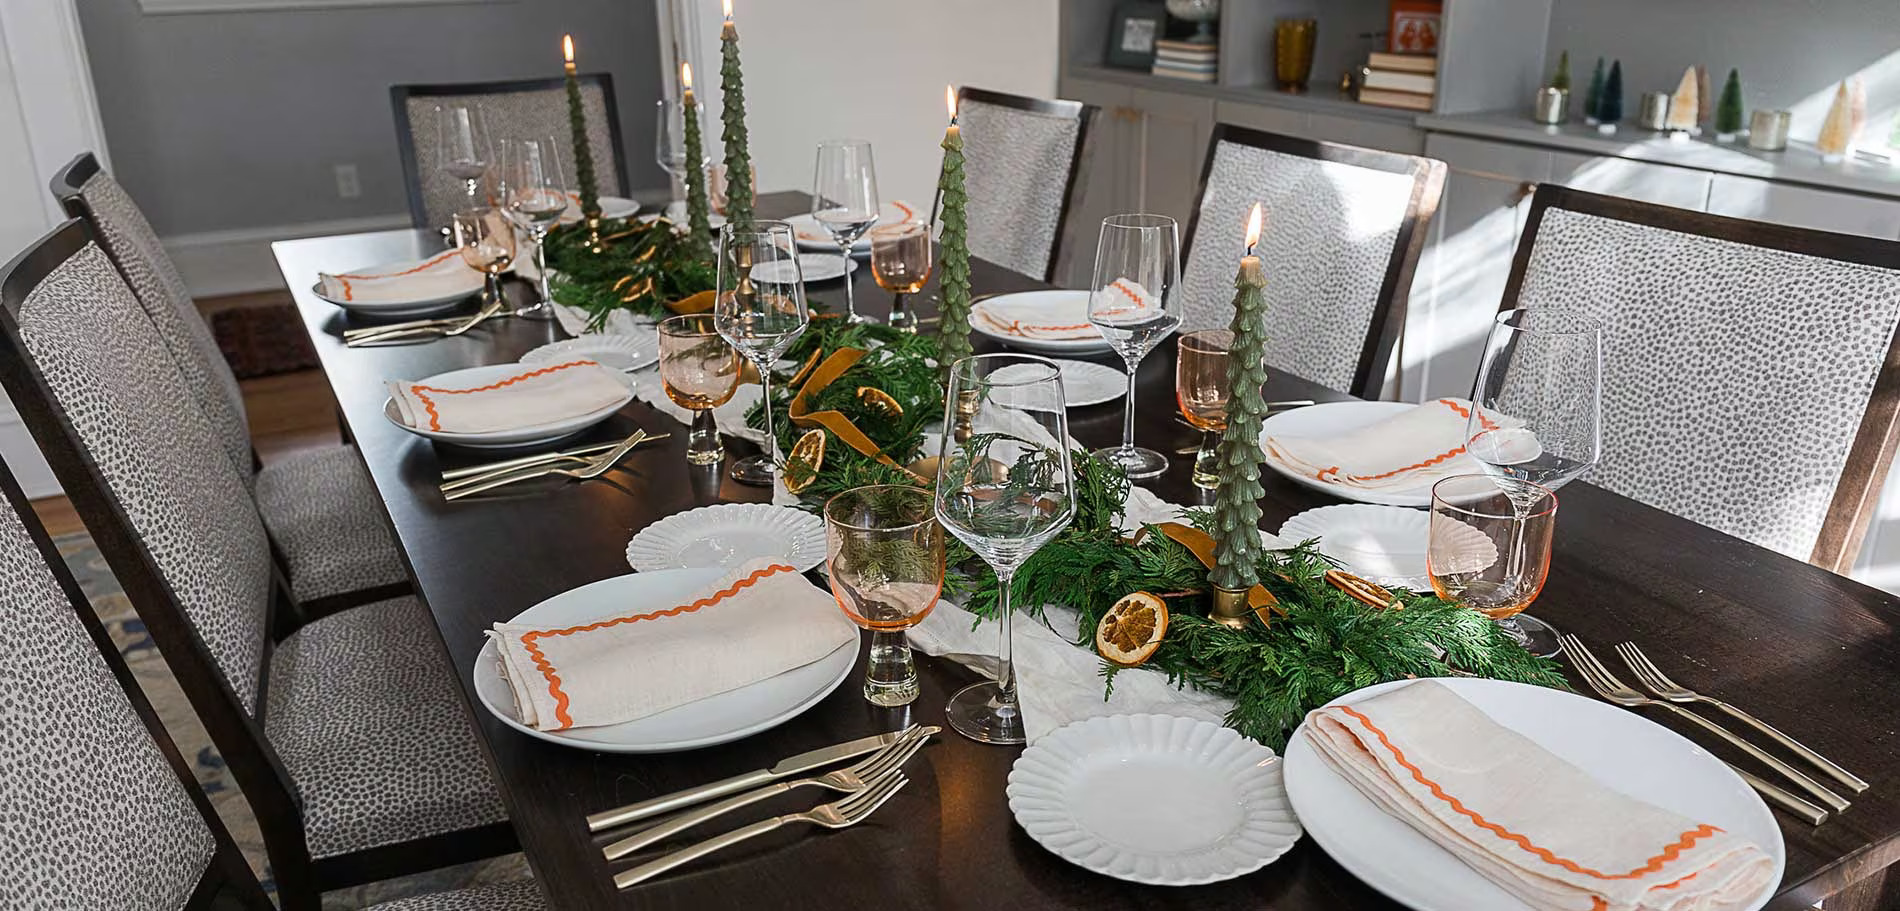 25 Elegant Christmas Table Decorating Ideas For A Festive Holiday